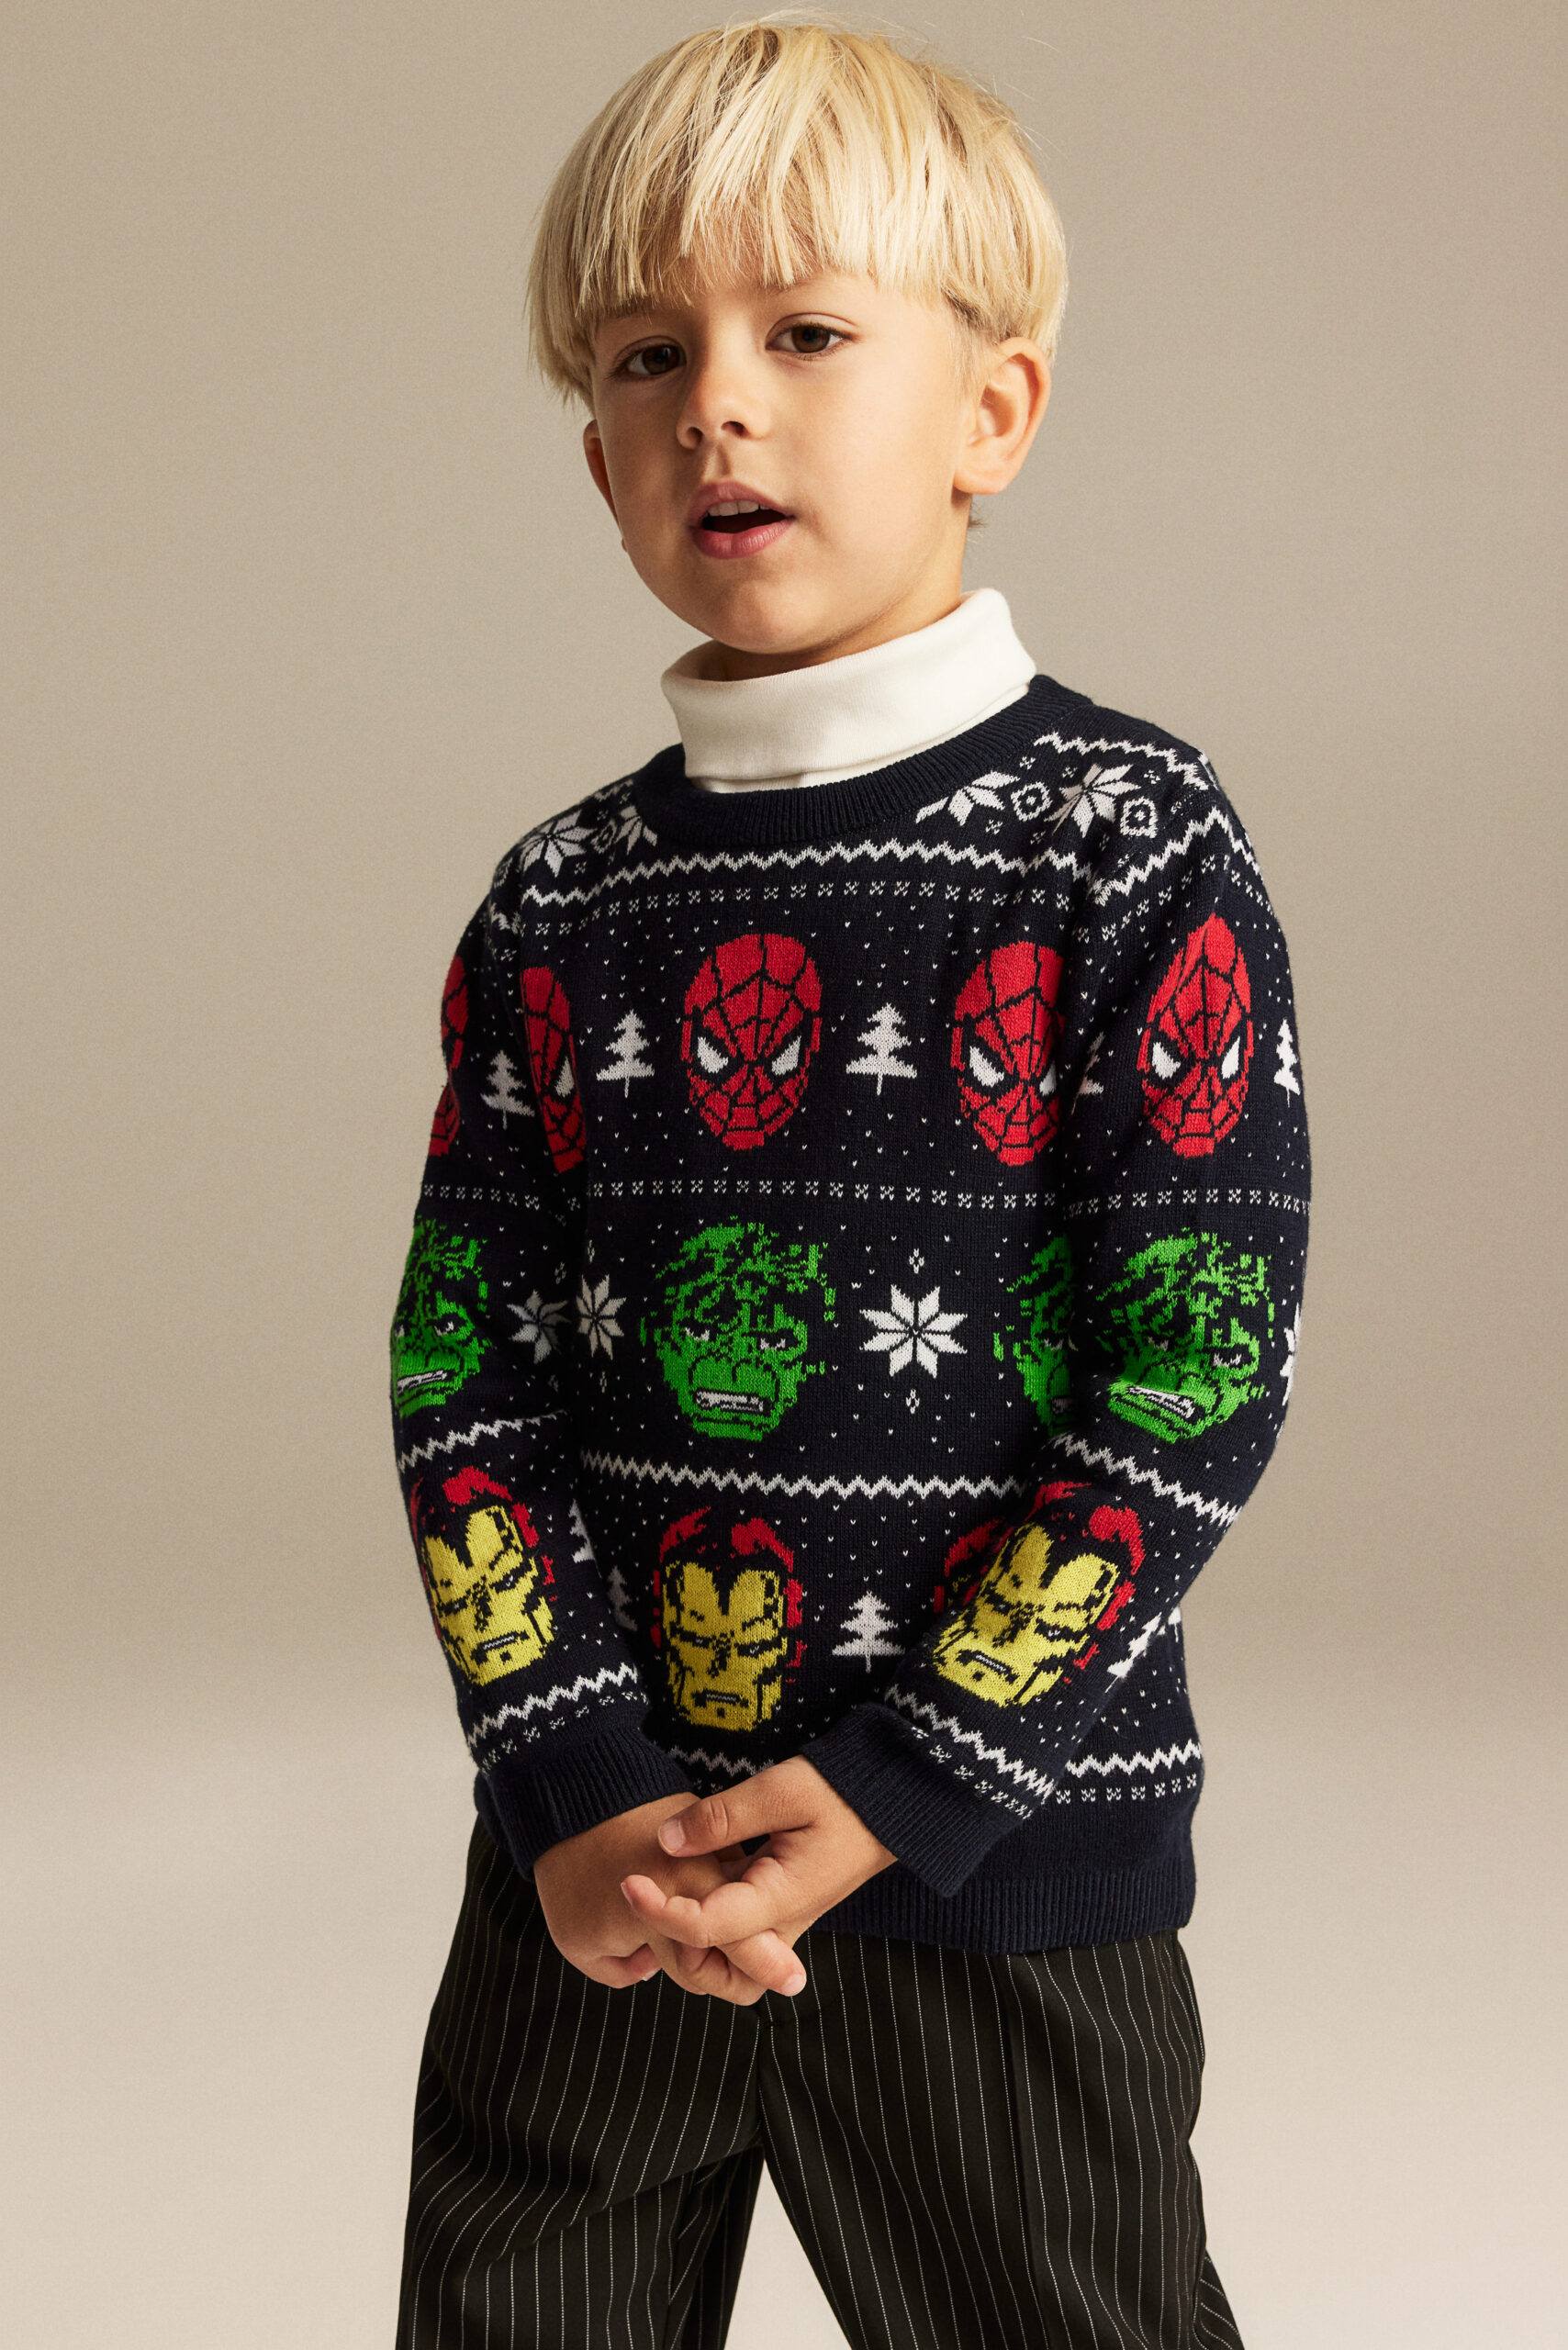 boy wearing knit cotton sweater with spiderman the hulk and spider man graphics